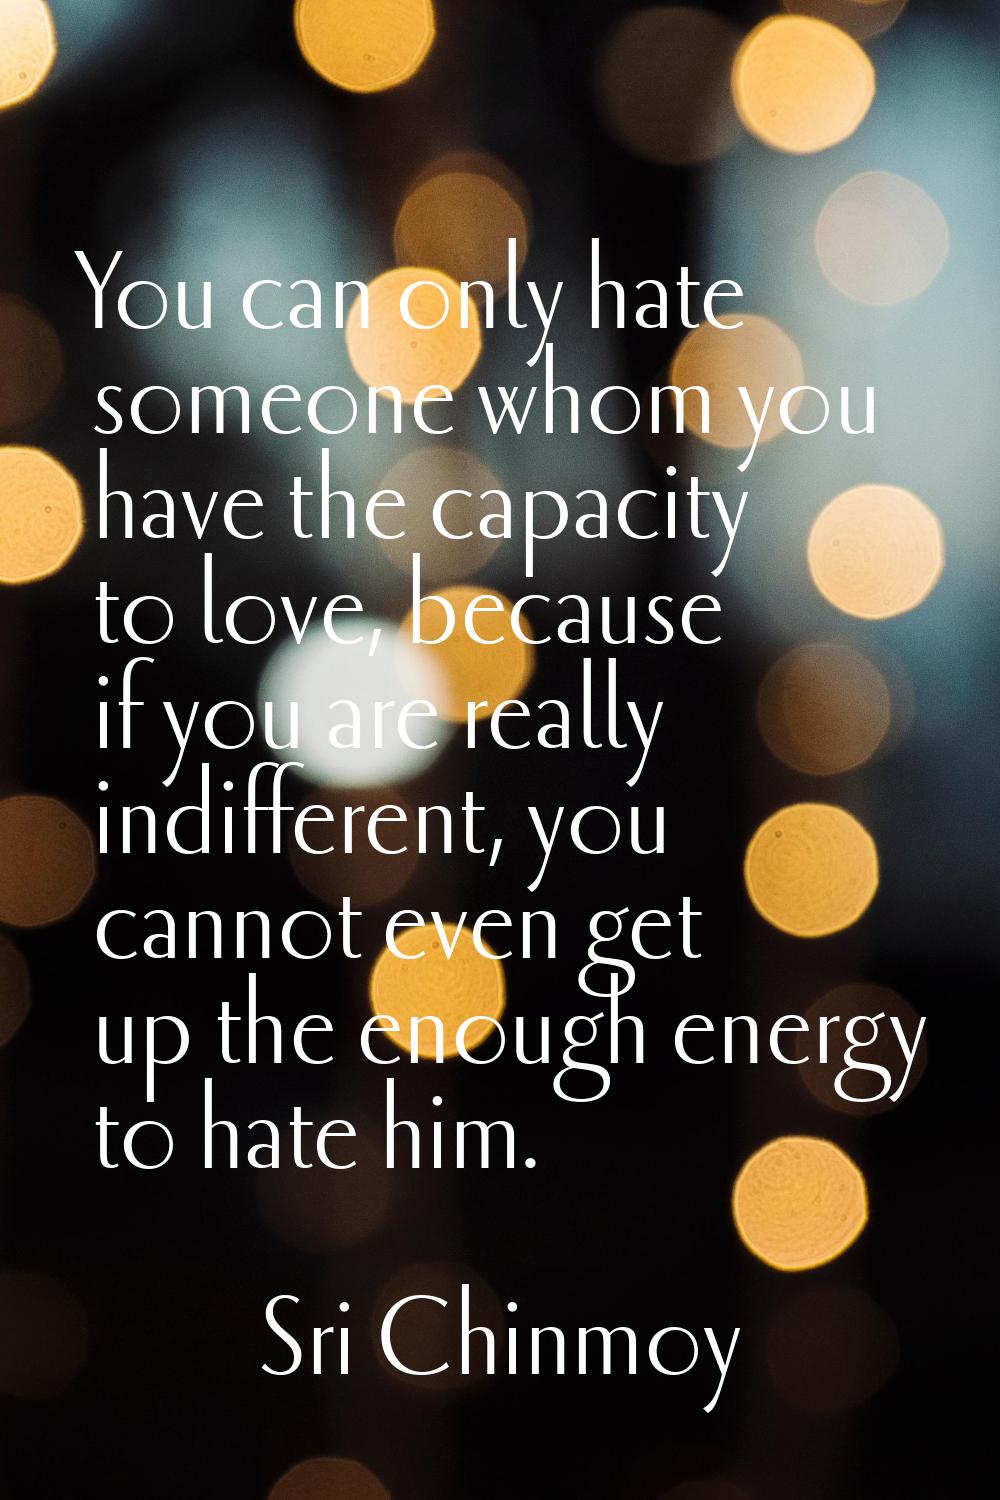 You can only hate someone whom you have the capacity to love, because if you are really indifferent